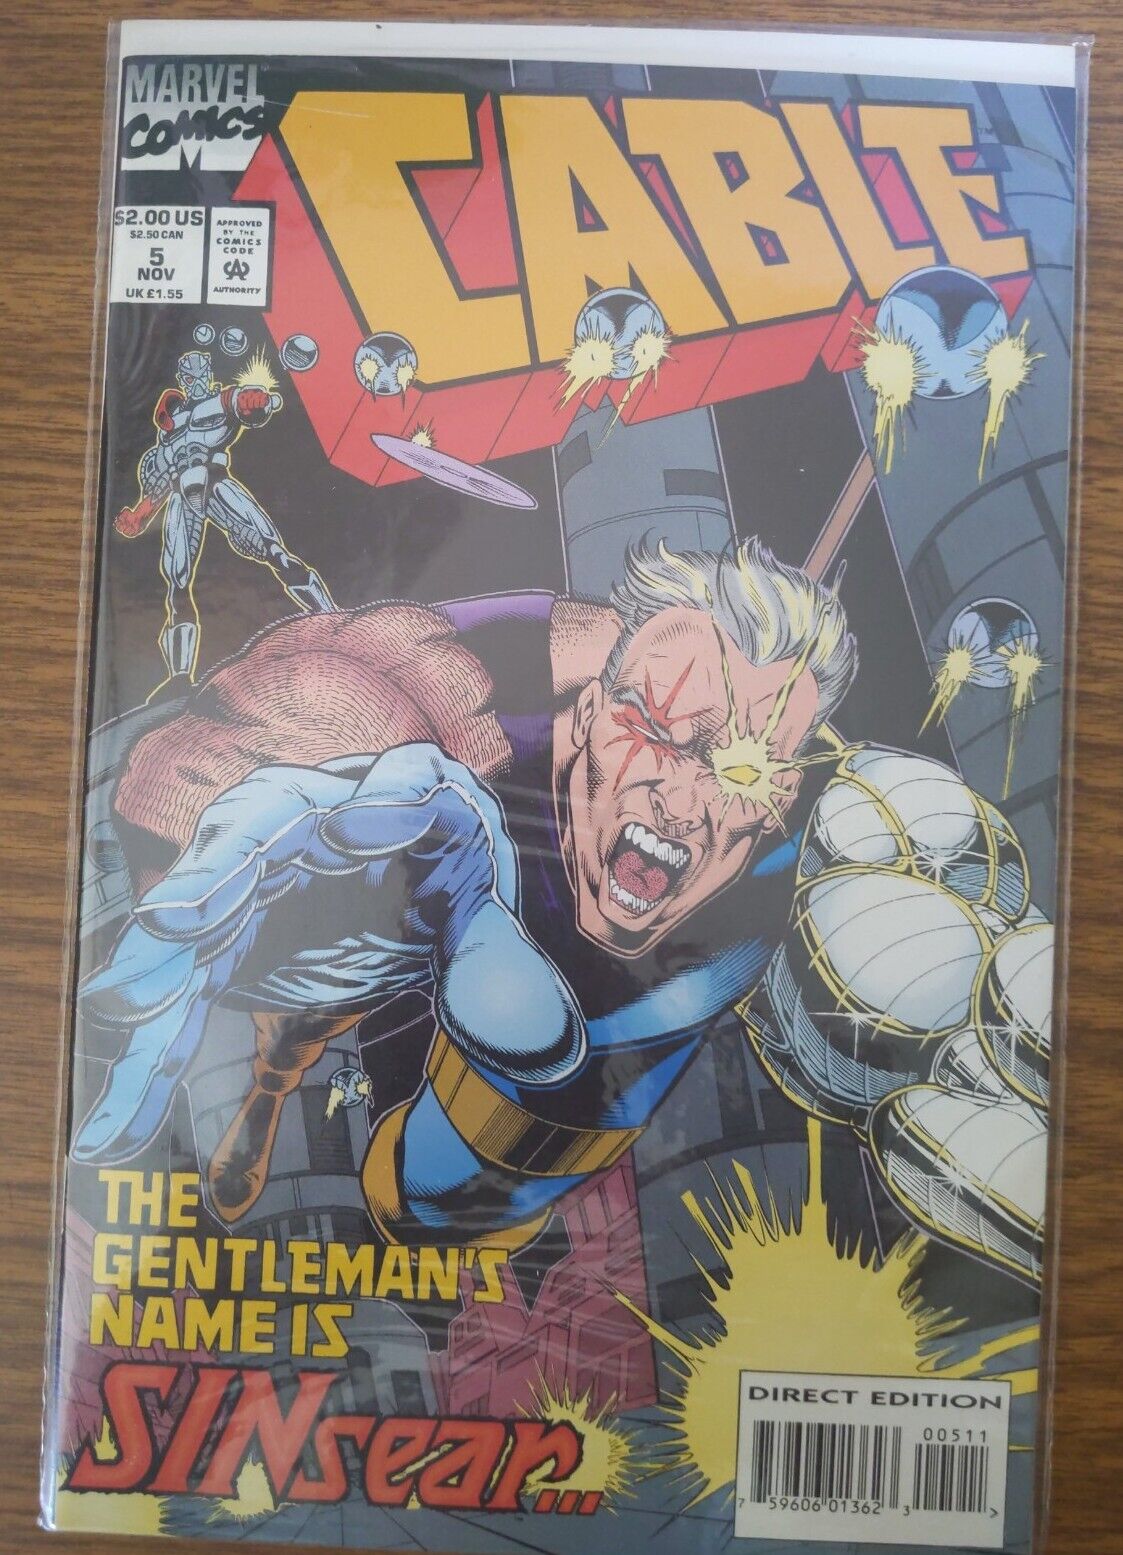 Cable Marvel Comics Nov 1993 #5 The Gentleman\'s Name is Sinsear